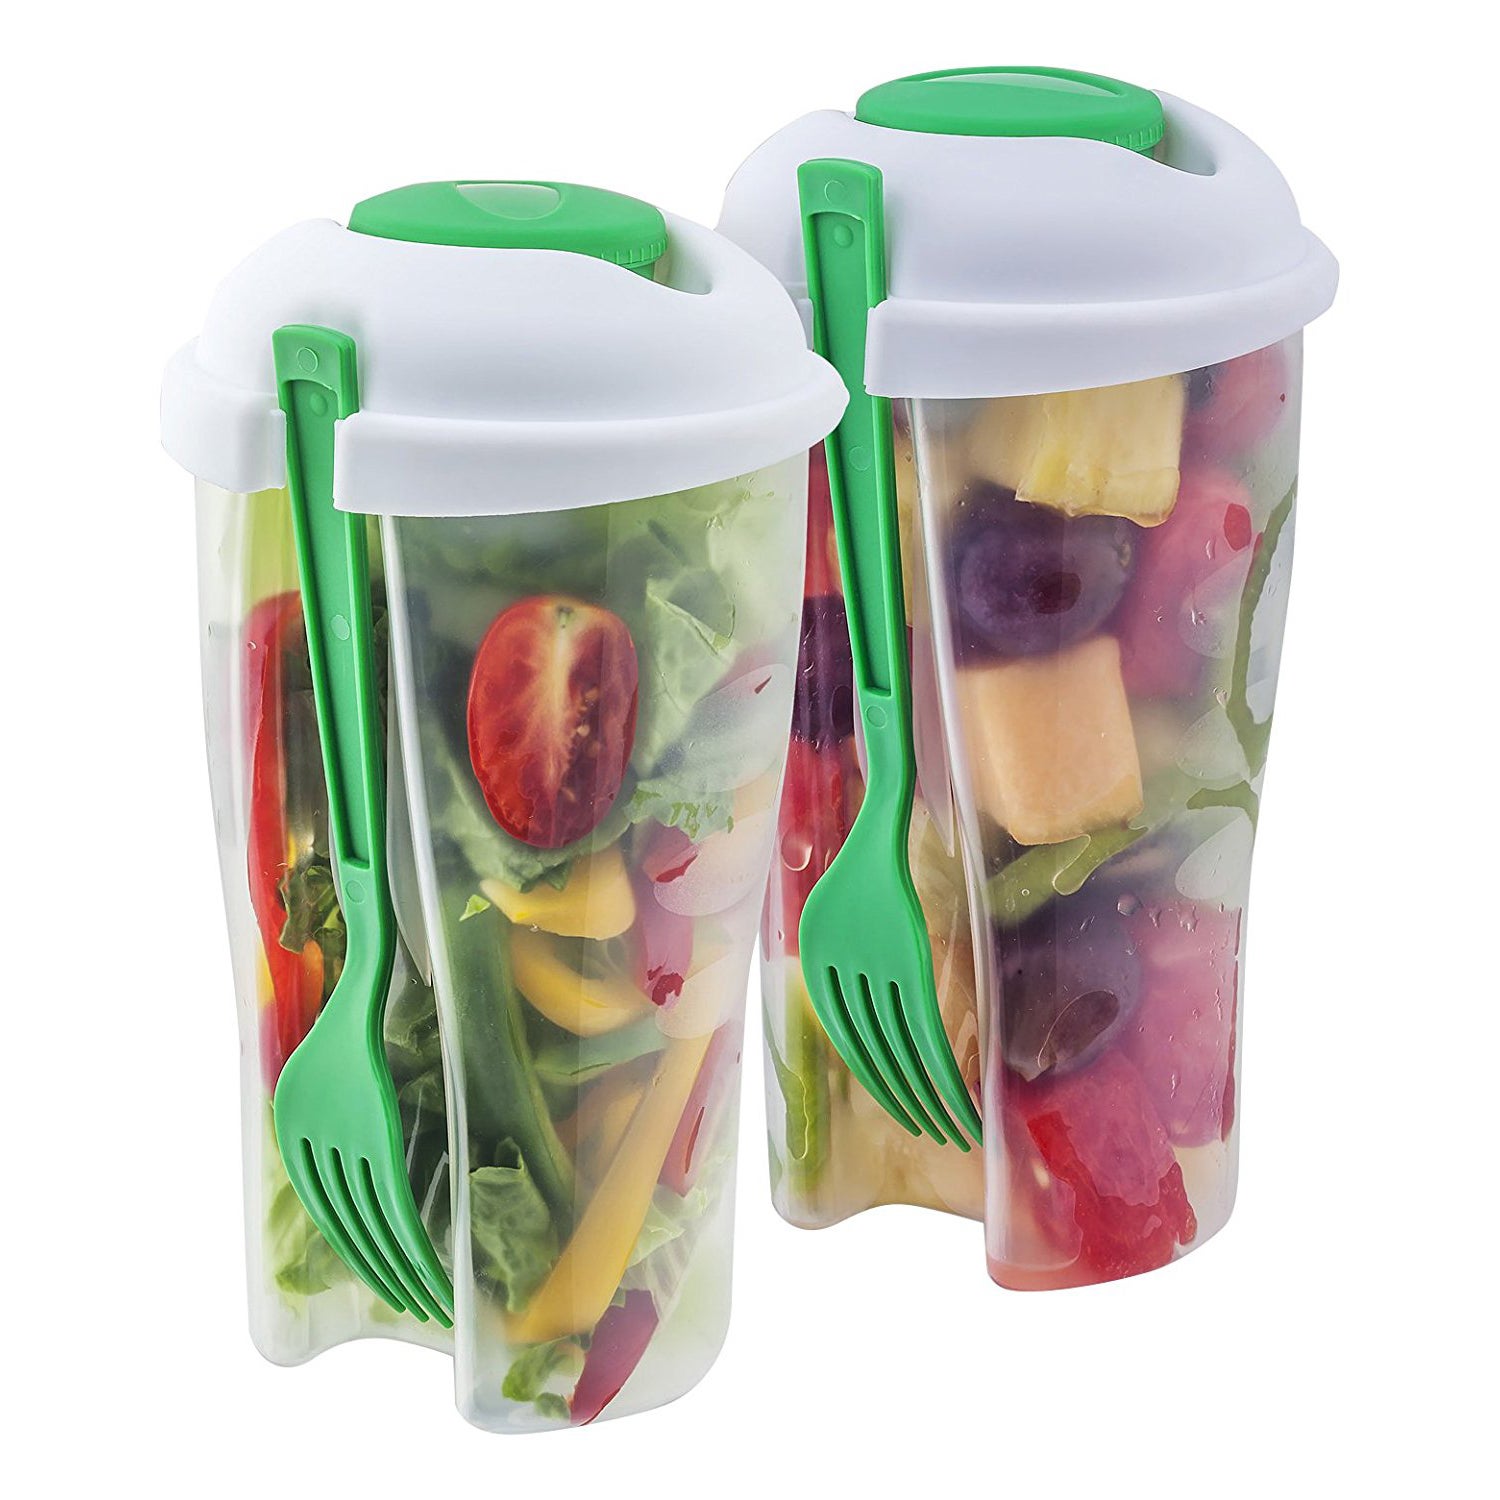 Goodful Sage Lunch To Go Salad Container System